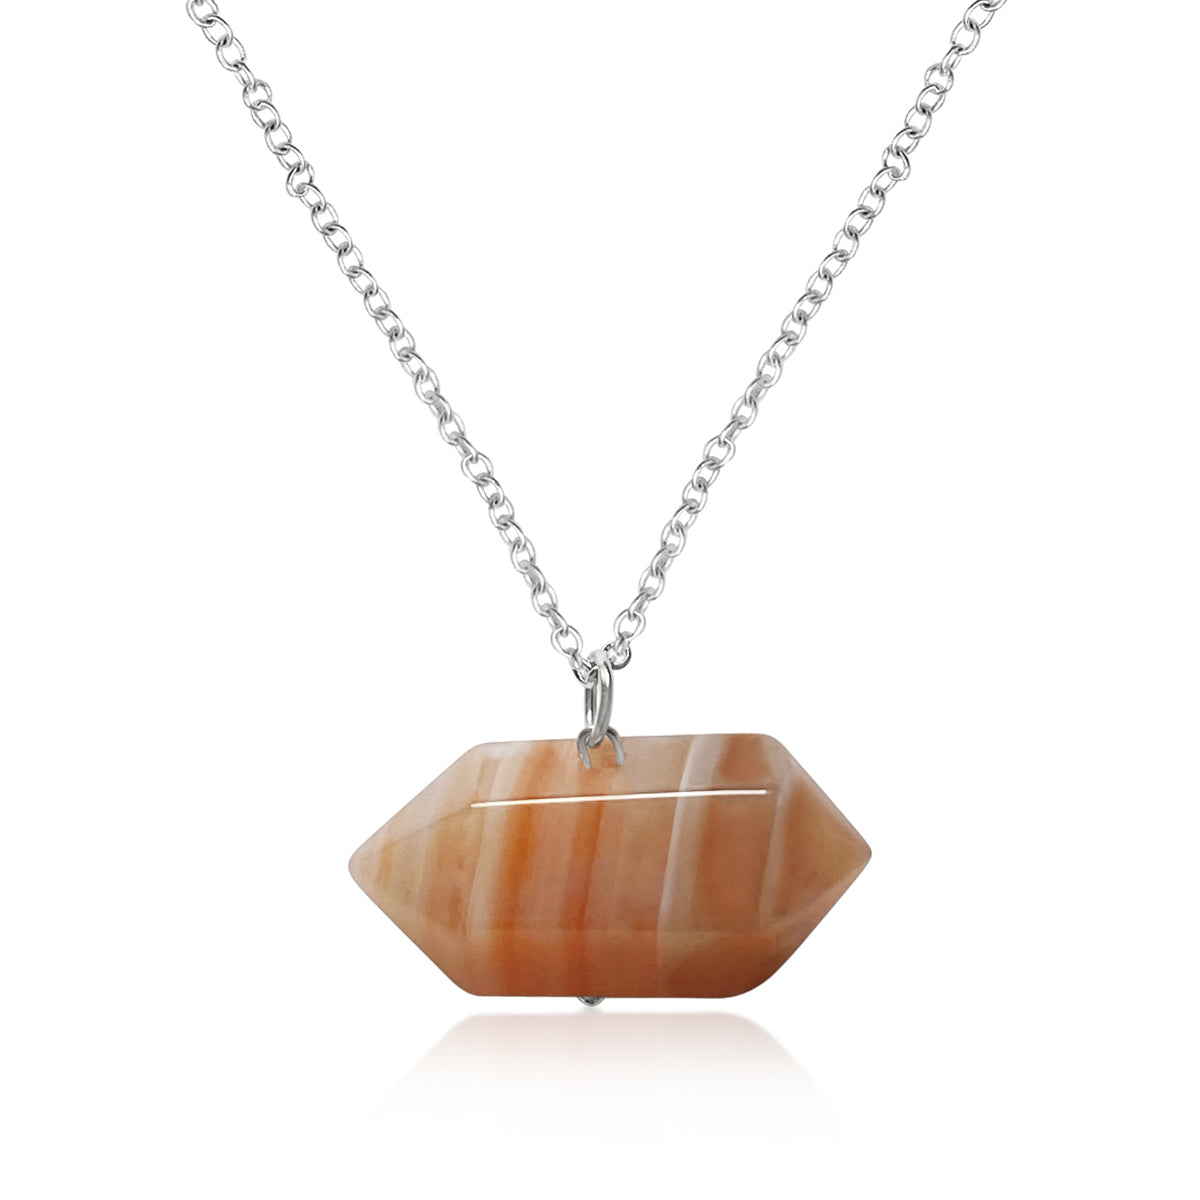 Agate Crystal Necklace for Protection Best crystals for protection Agate is the stone for Protection. Agate is THE stone everyone should have for protection. Agate is believed to enhance intelligence, and make its wearer more articulate. 